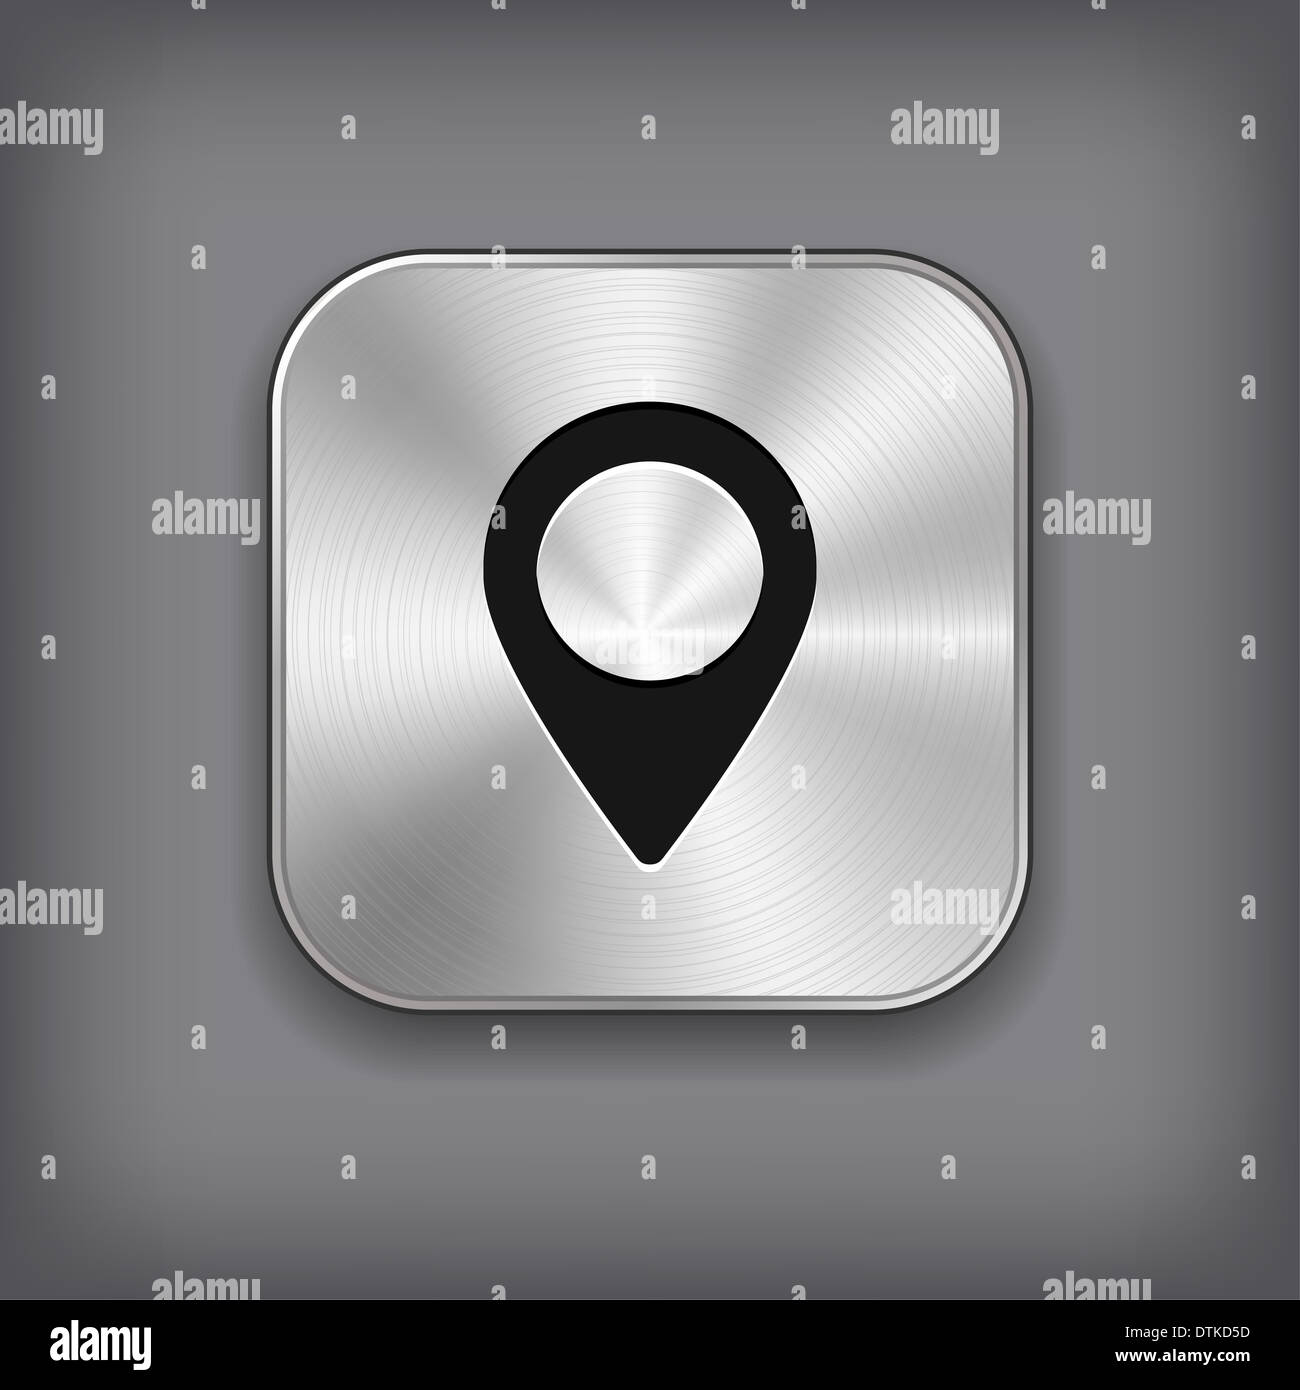 Map pointer icon - metal app button with shadow Stock Photo